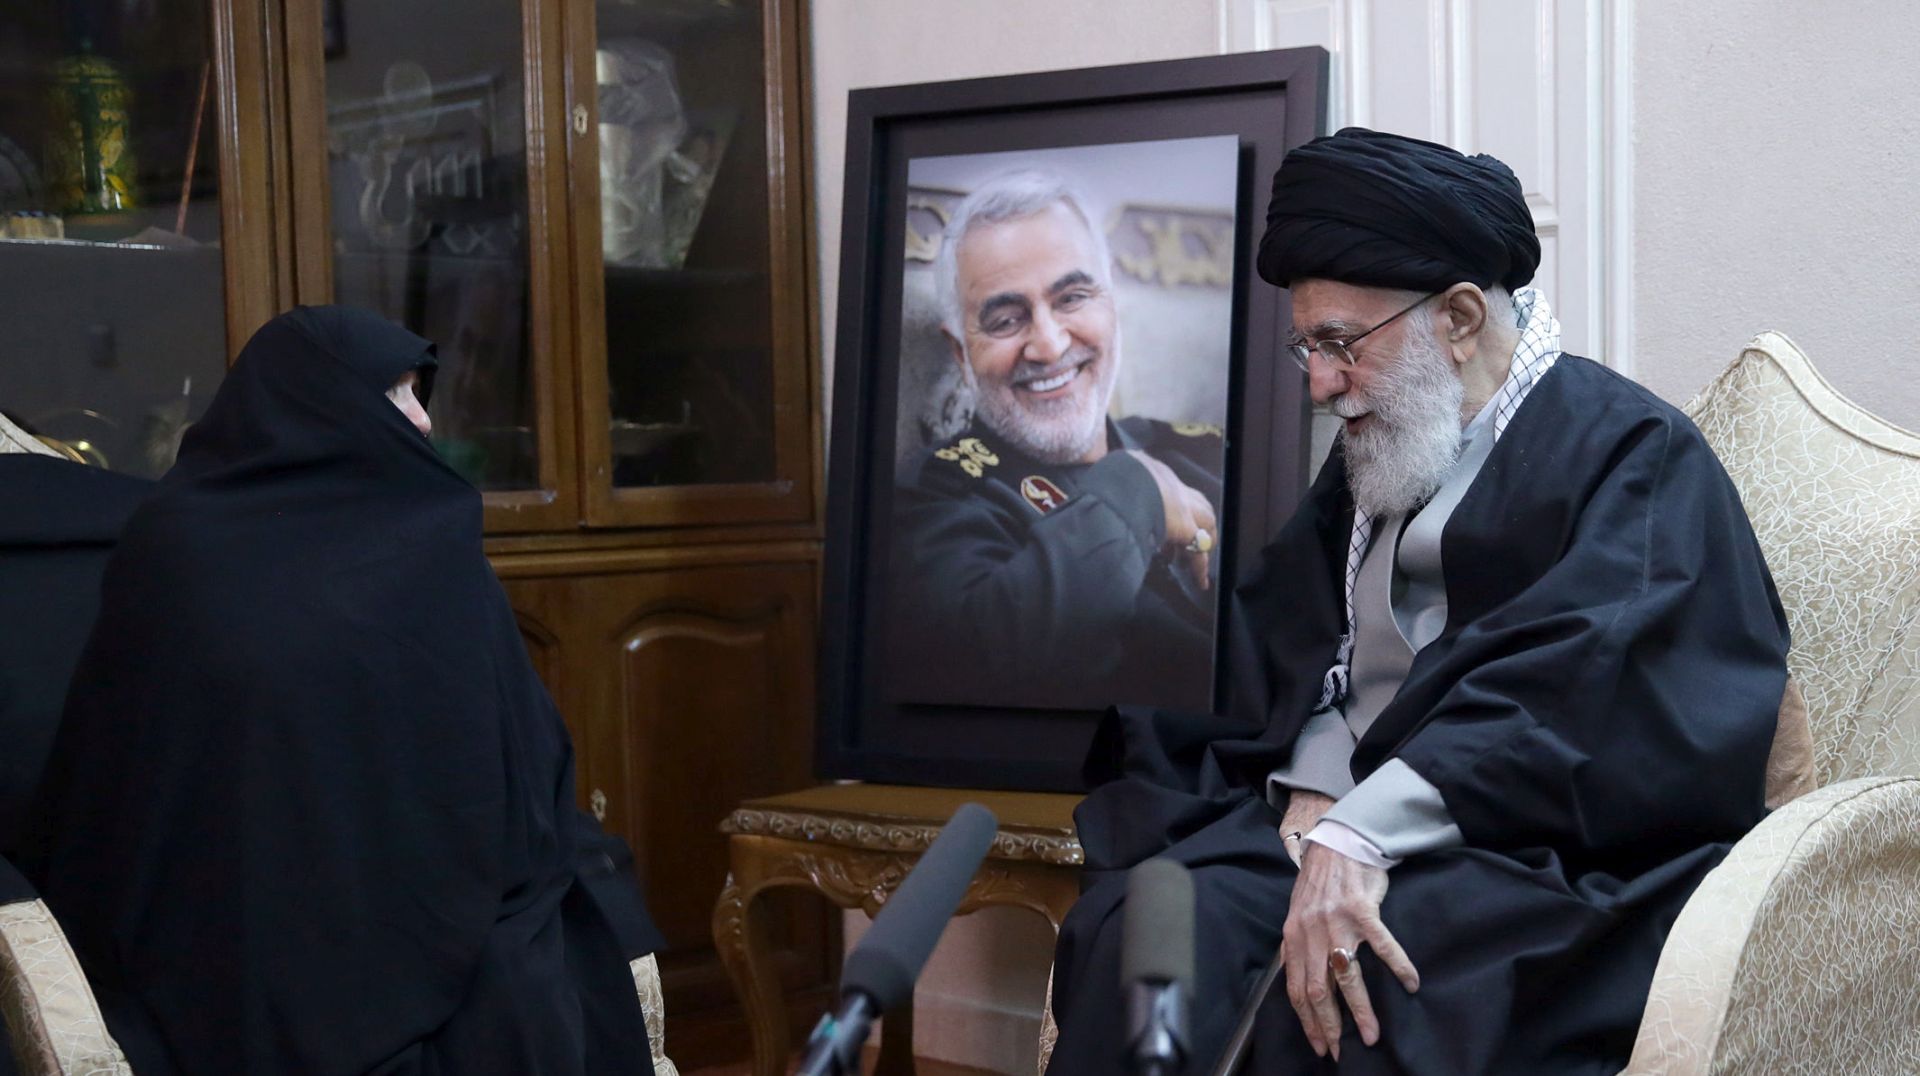 epa08100533 A handout photo made available by the supreme leader office shows, Iranian supreme leader Ali Khamenei (R) meets with the family of Iranian Revolutionary Guards Corps (IRGC) Lieutenant general and commander of the Quds Force Qasem Soleimani at his home in Tehran, Iran, 03 January 2020. The Pentagon announced that Iran's Quds Force leader Qasem Soleimani and Iraqi militia commander Abu Mahdi al-Muhandis were killed on 03 January 2020 following a US airstrike at Baghdad's international airport. The attack comes amid escalating tensions between Tehran and Washington.  EPA/IRAN SUPREME LEADER OFFICE HANDOUT HANDOUT  HANDOUT EDITORIAL USE ONLY/NO SALES